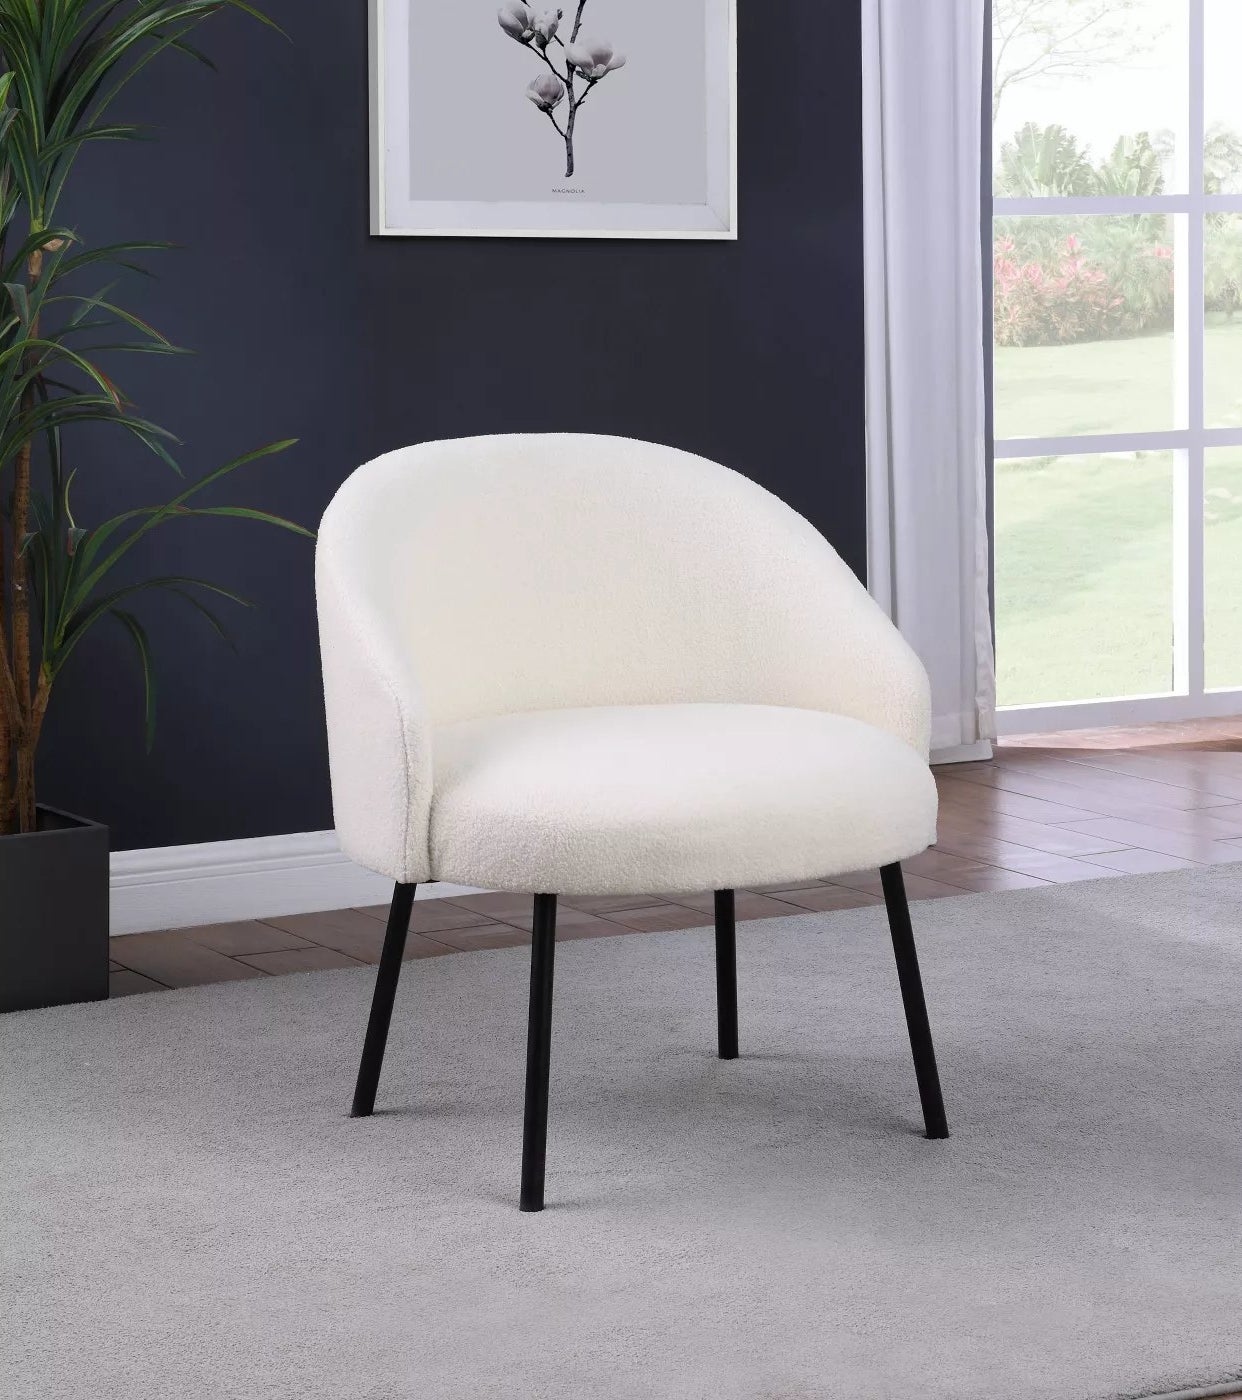 The white chair with black legs